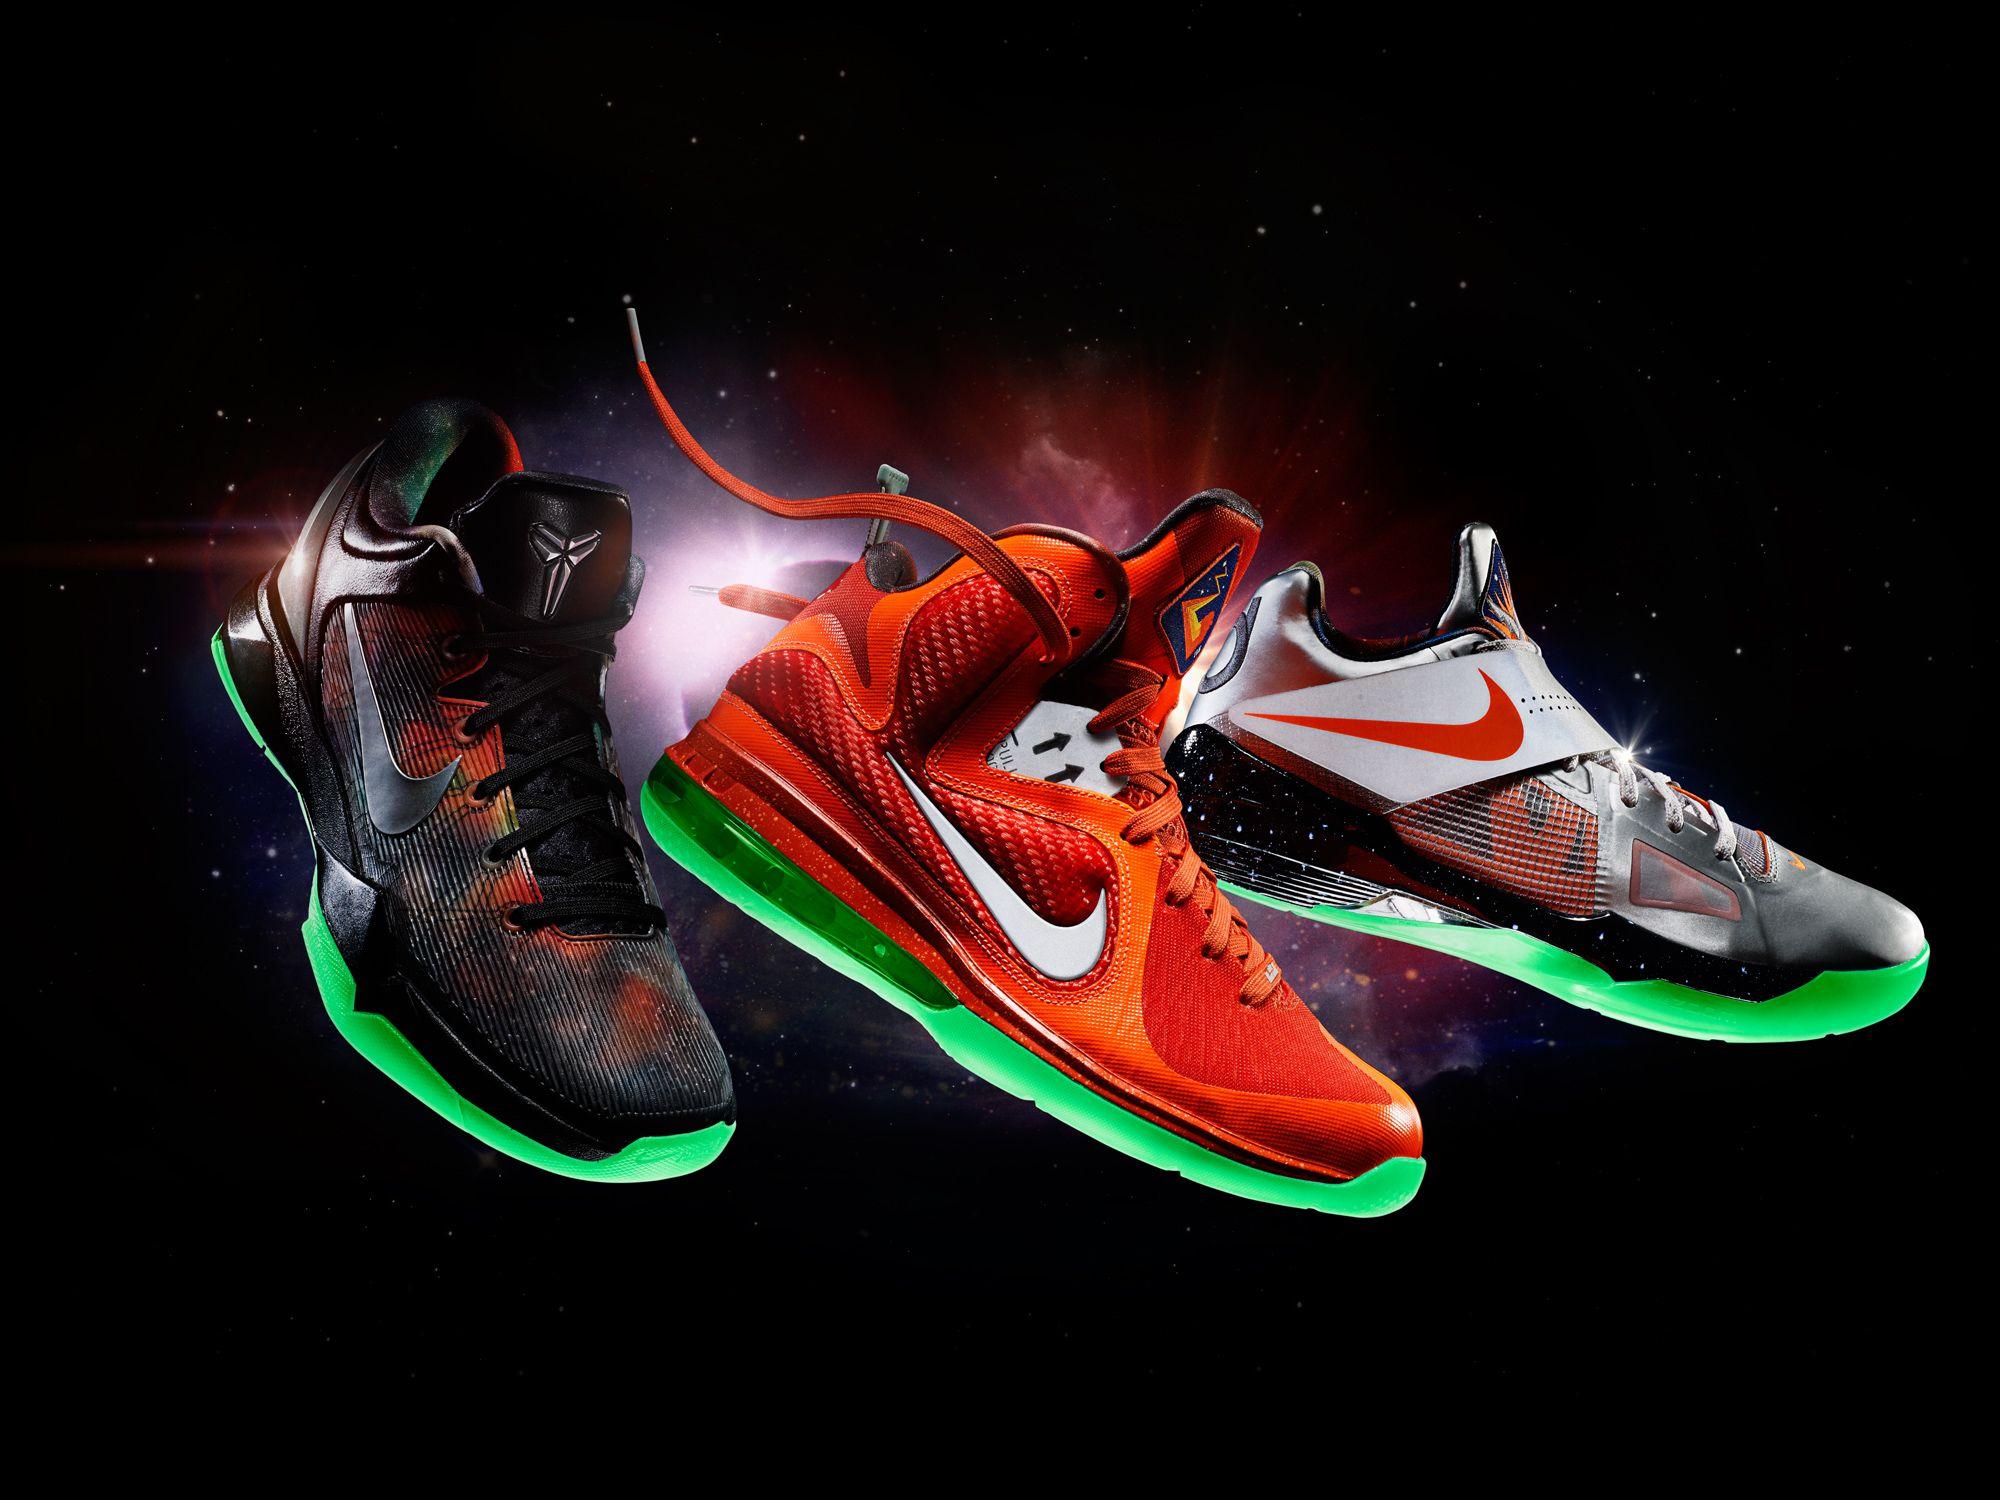 Photos: All Star Edition Shoes For Kobe Bryant, Kevin Durant